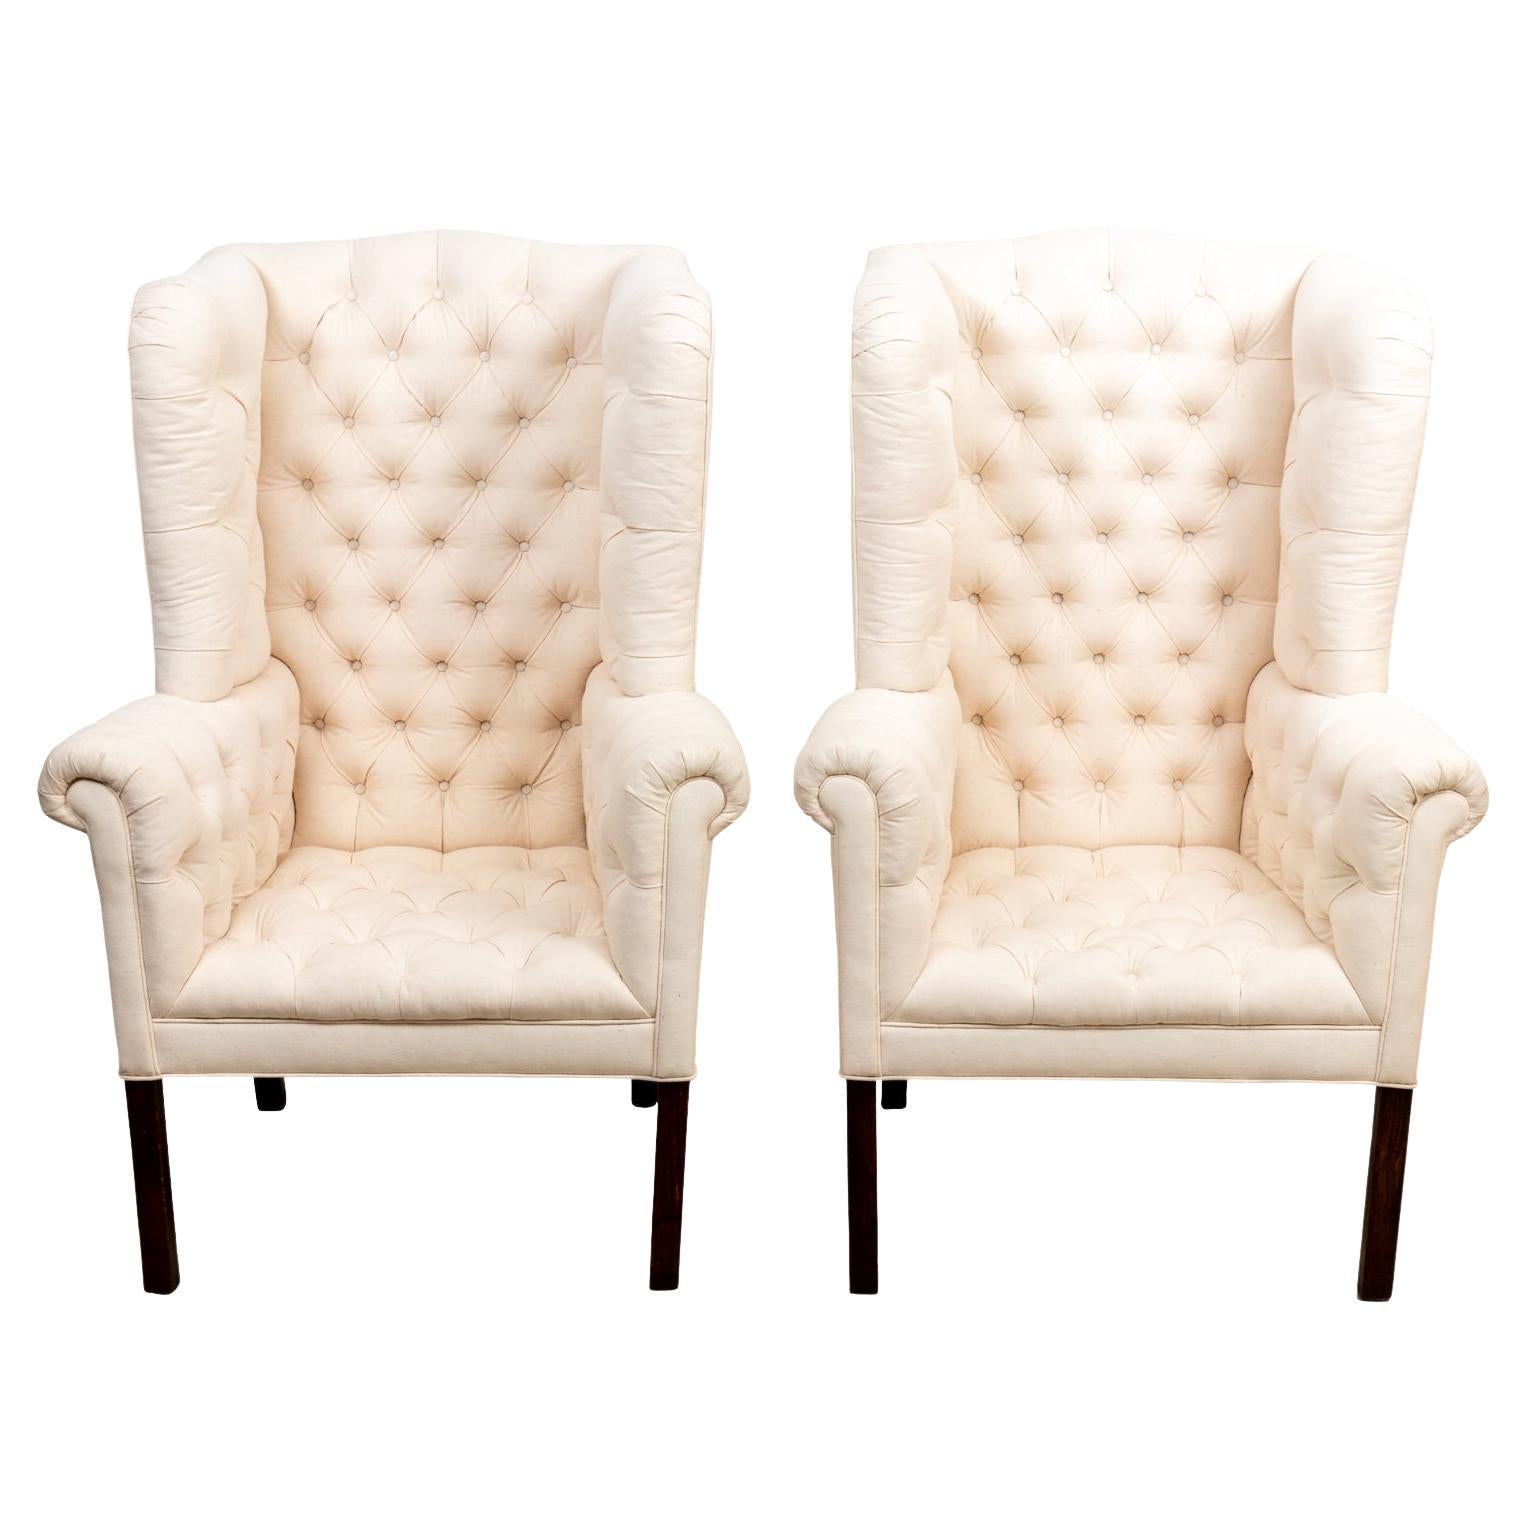 Pair English Tufted Wing Chairs Late 18th Century Upholstered in Muslin